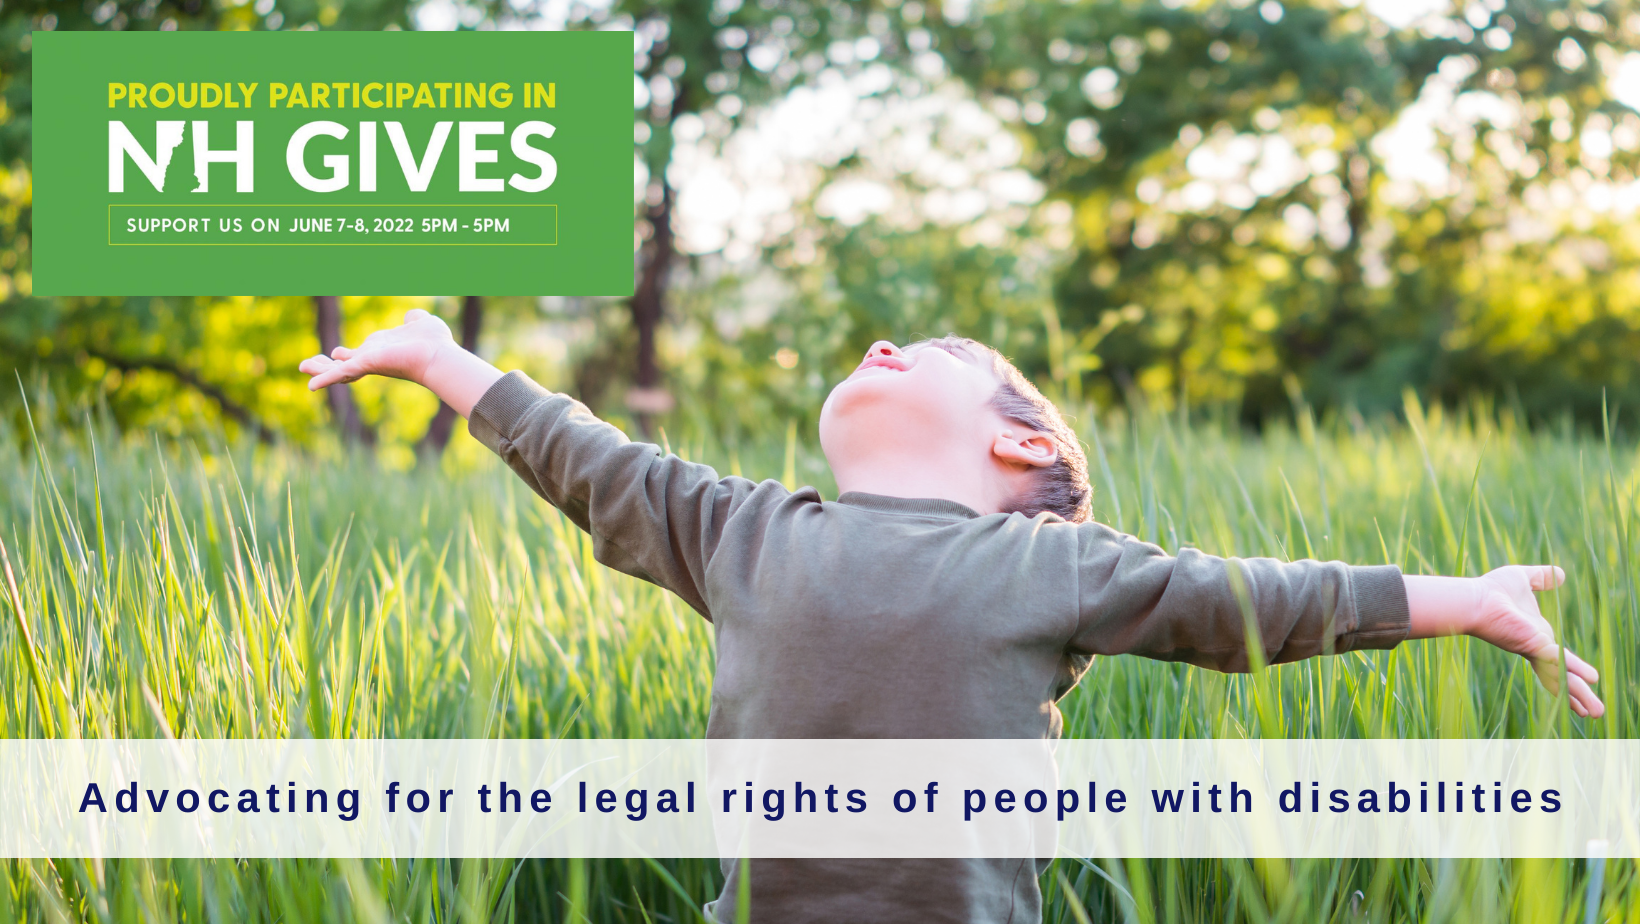 Young child with light skin tone leans back with open arms while standing in a field of green and yellow grass. NH Gives logo in top left corner and text along the bottom reads 'Advocating for the legal rights of people with disabilities'